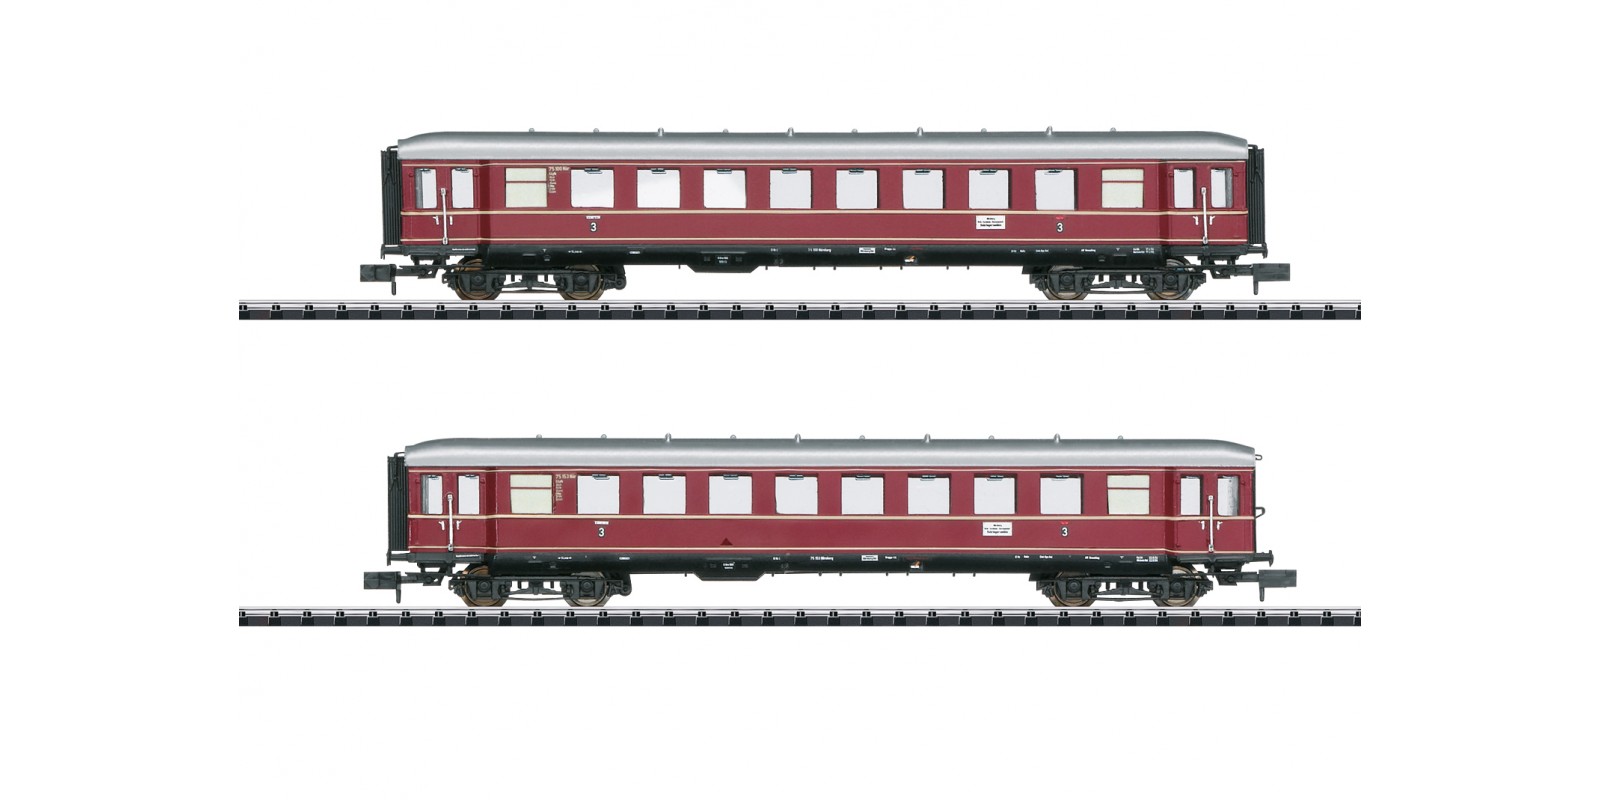 T15406 The Red Bamberg Cars Car Set,